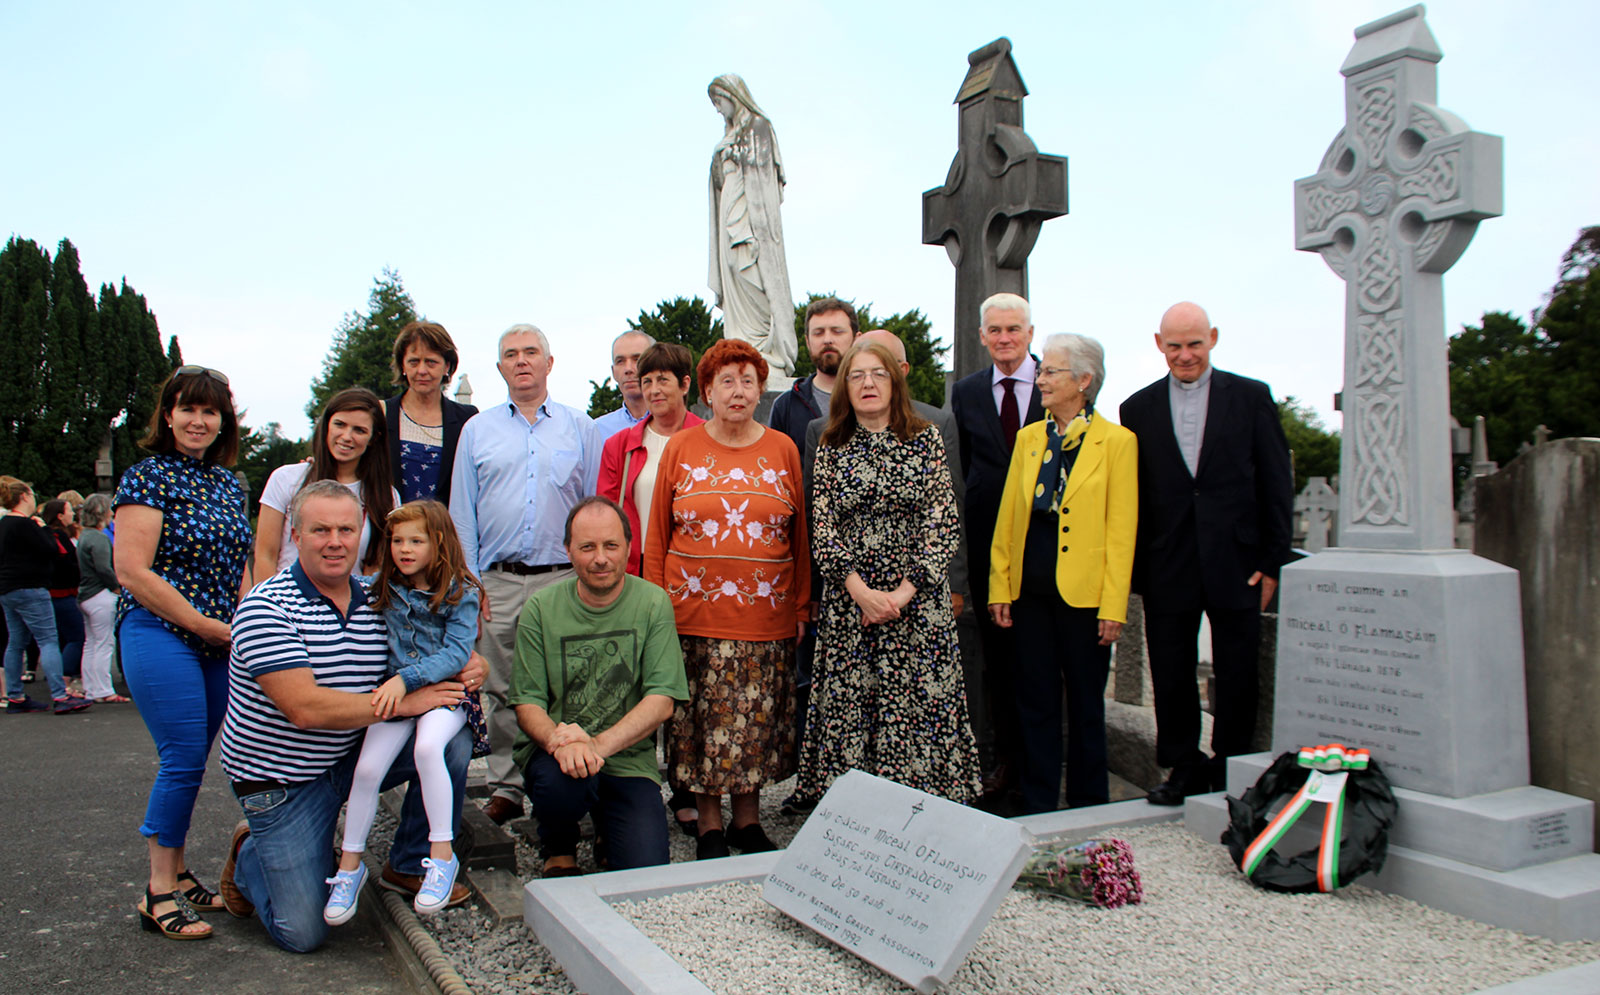 Group photo taken at the unveiling ceremont in Glasnevin, 25th August 2019.